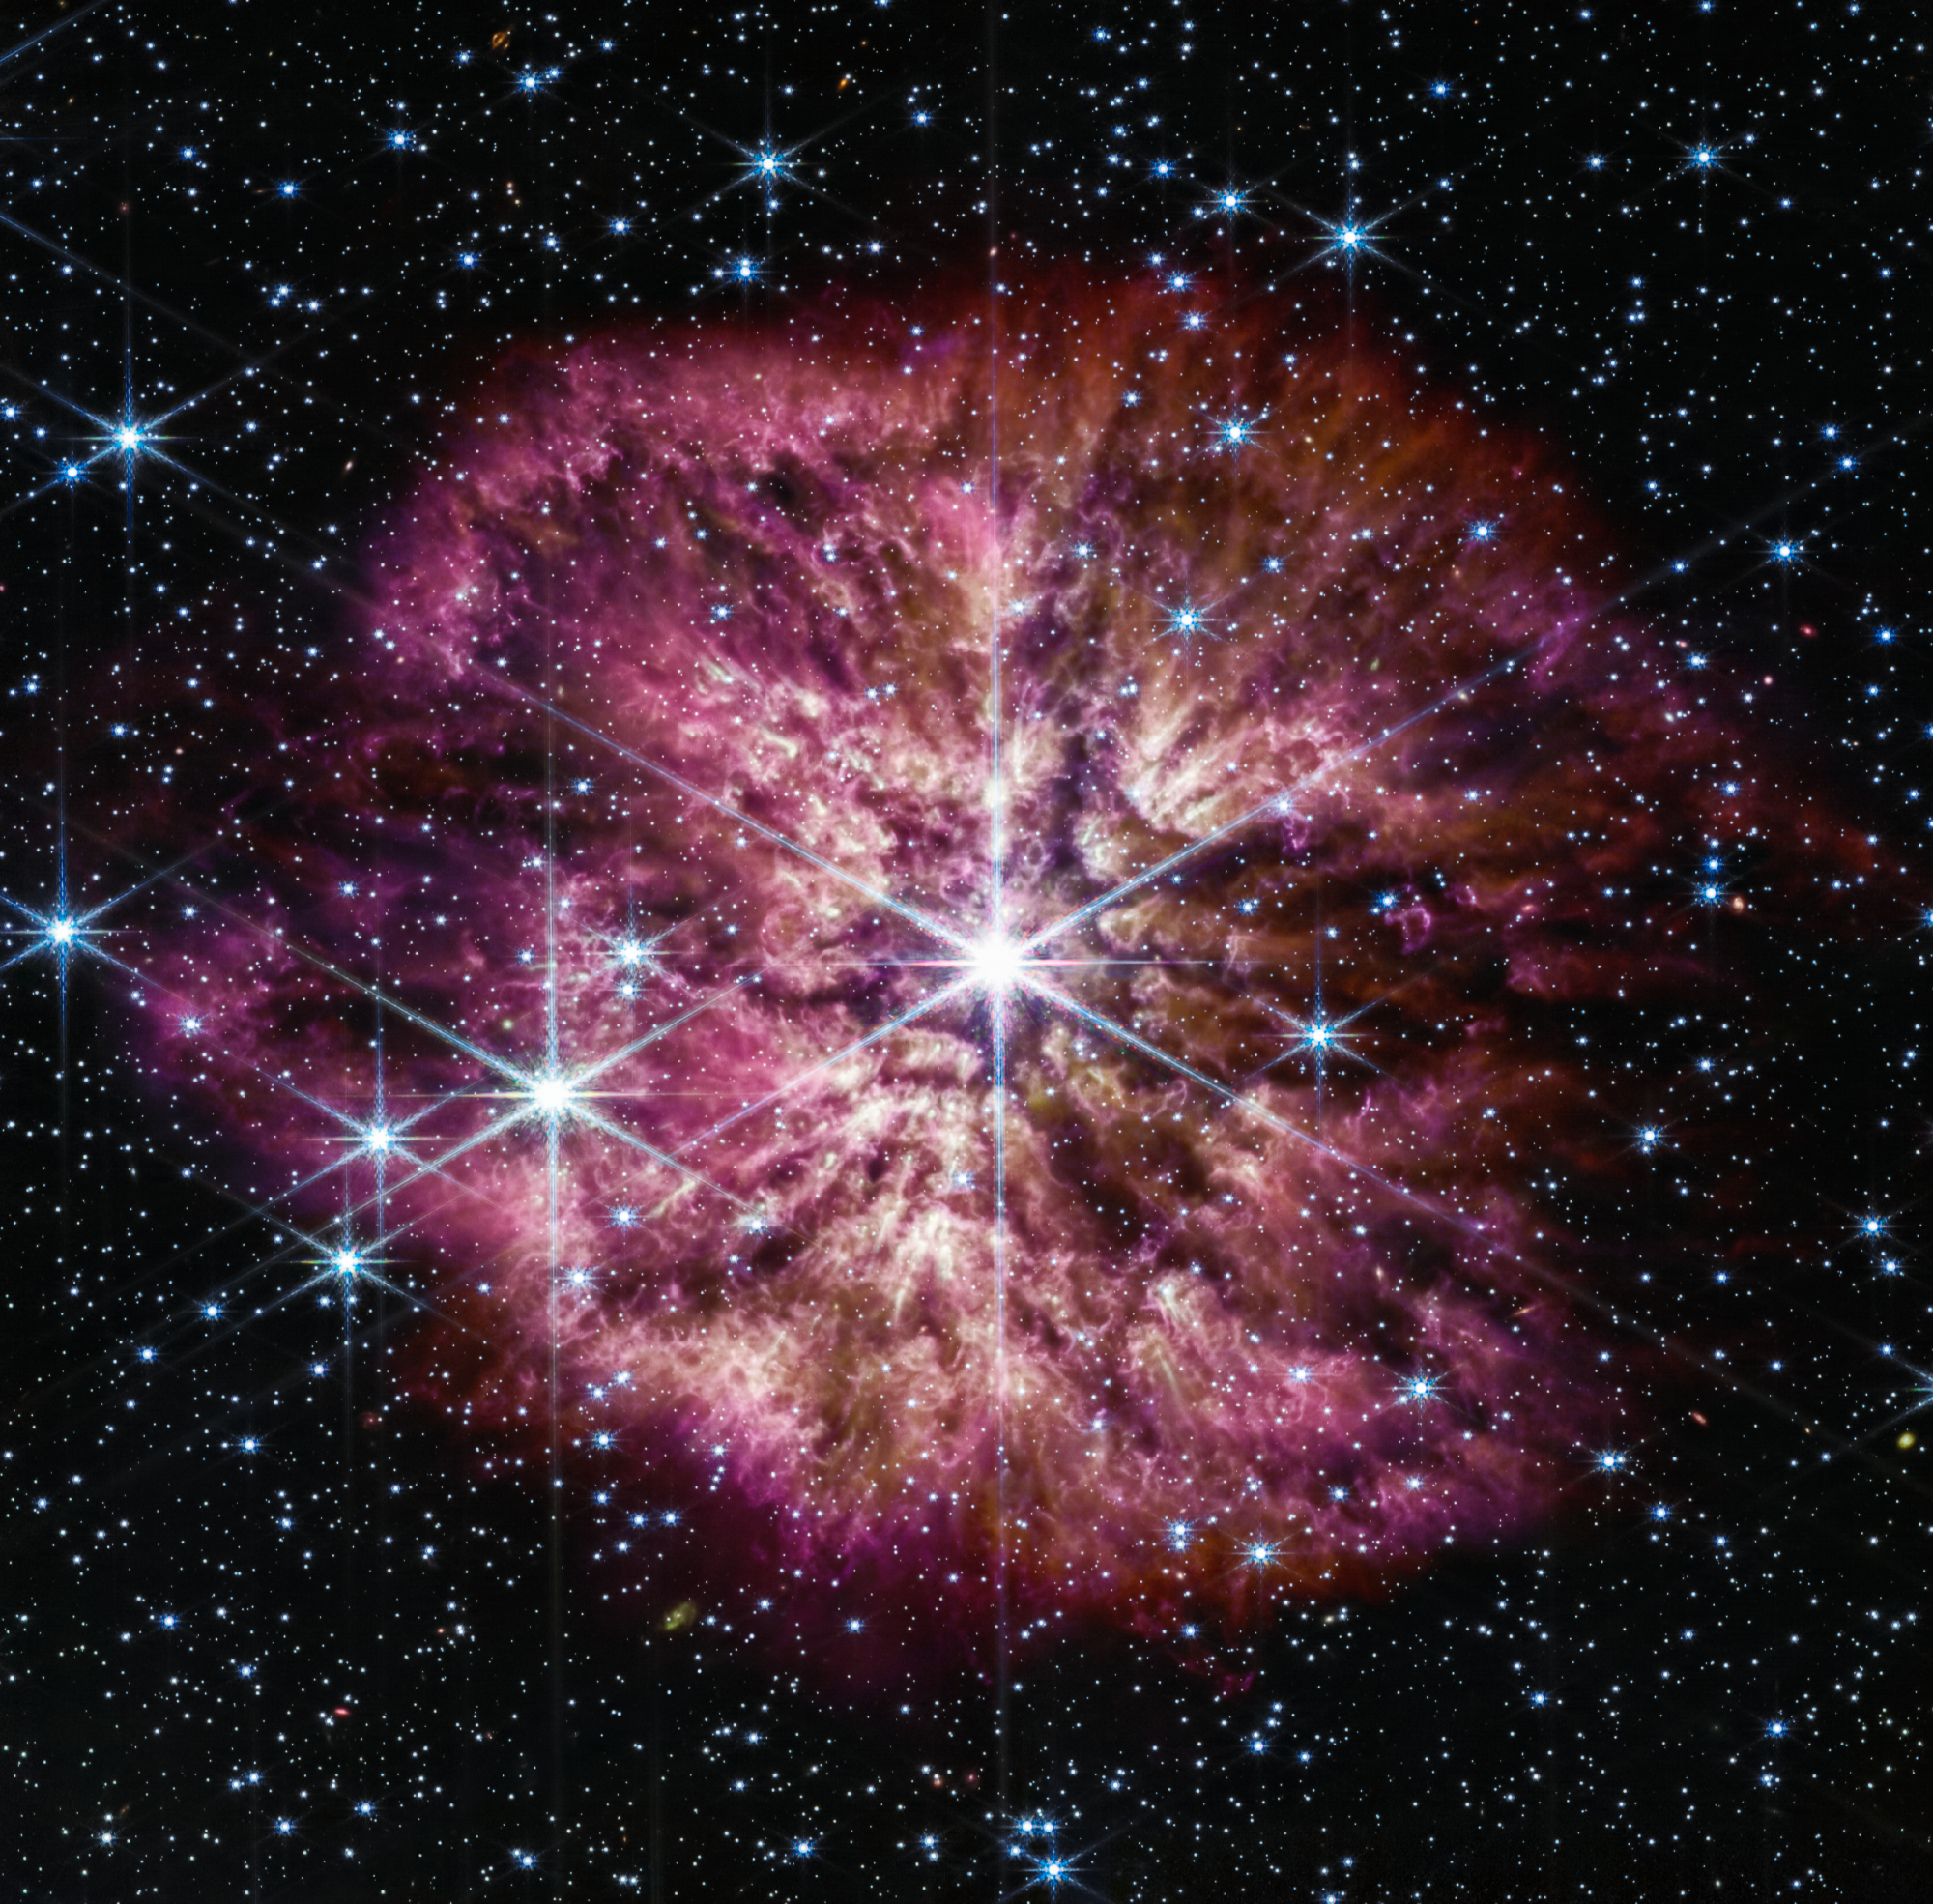 The Biggest Bang Theory: Astronomers Confirm a New Type of Supernova